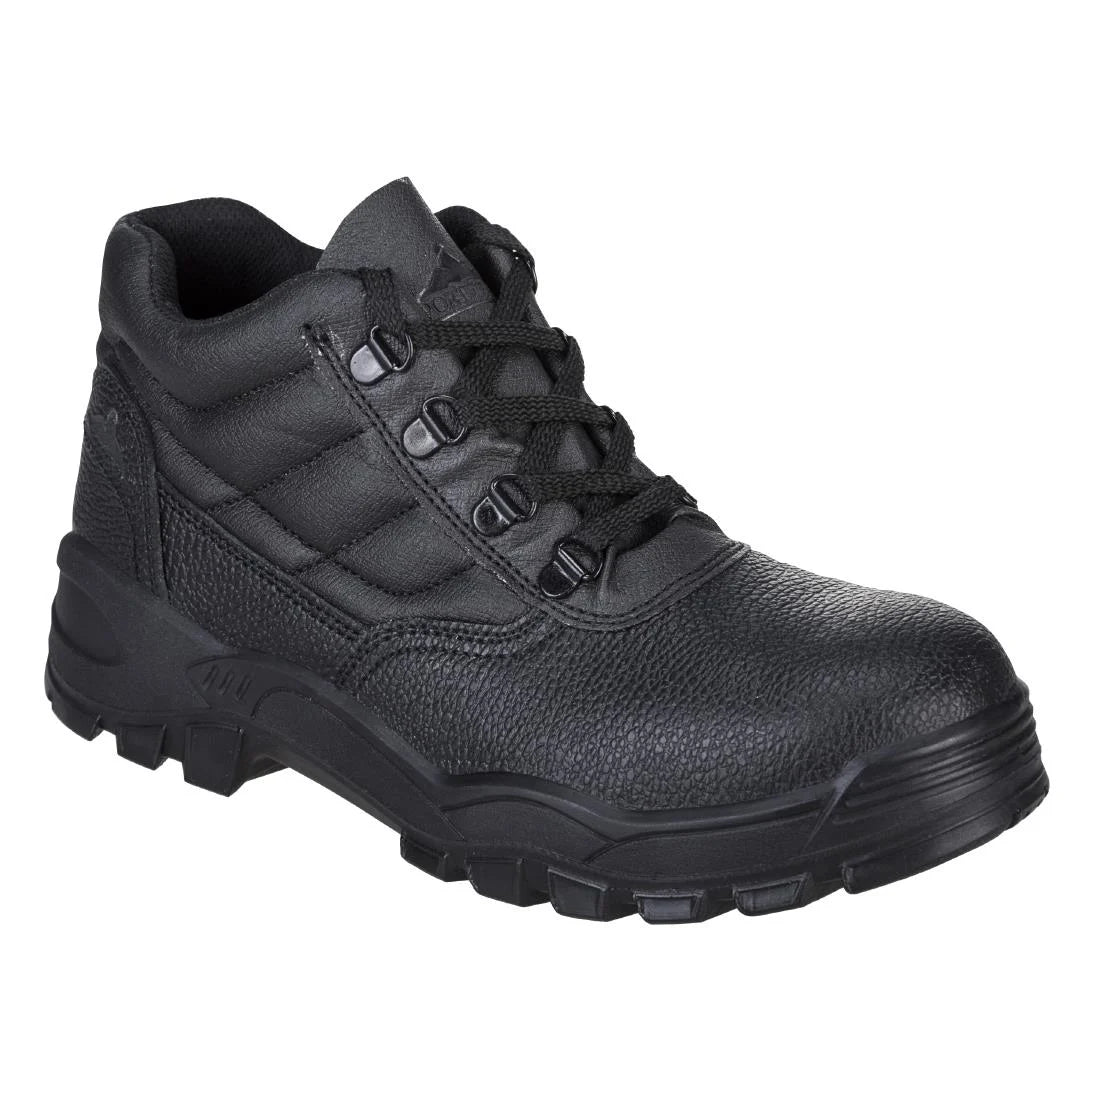 BA059-36 Portwest Protector Boot S1P Black Size 36 JD Catering Equipment Solutions Ltd